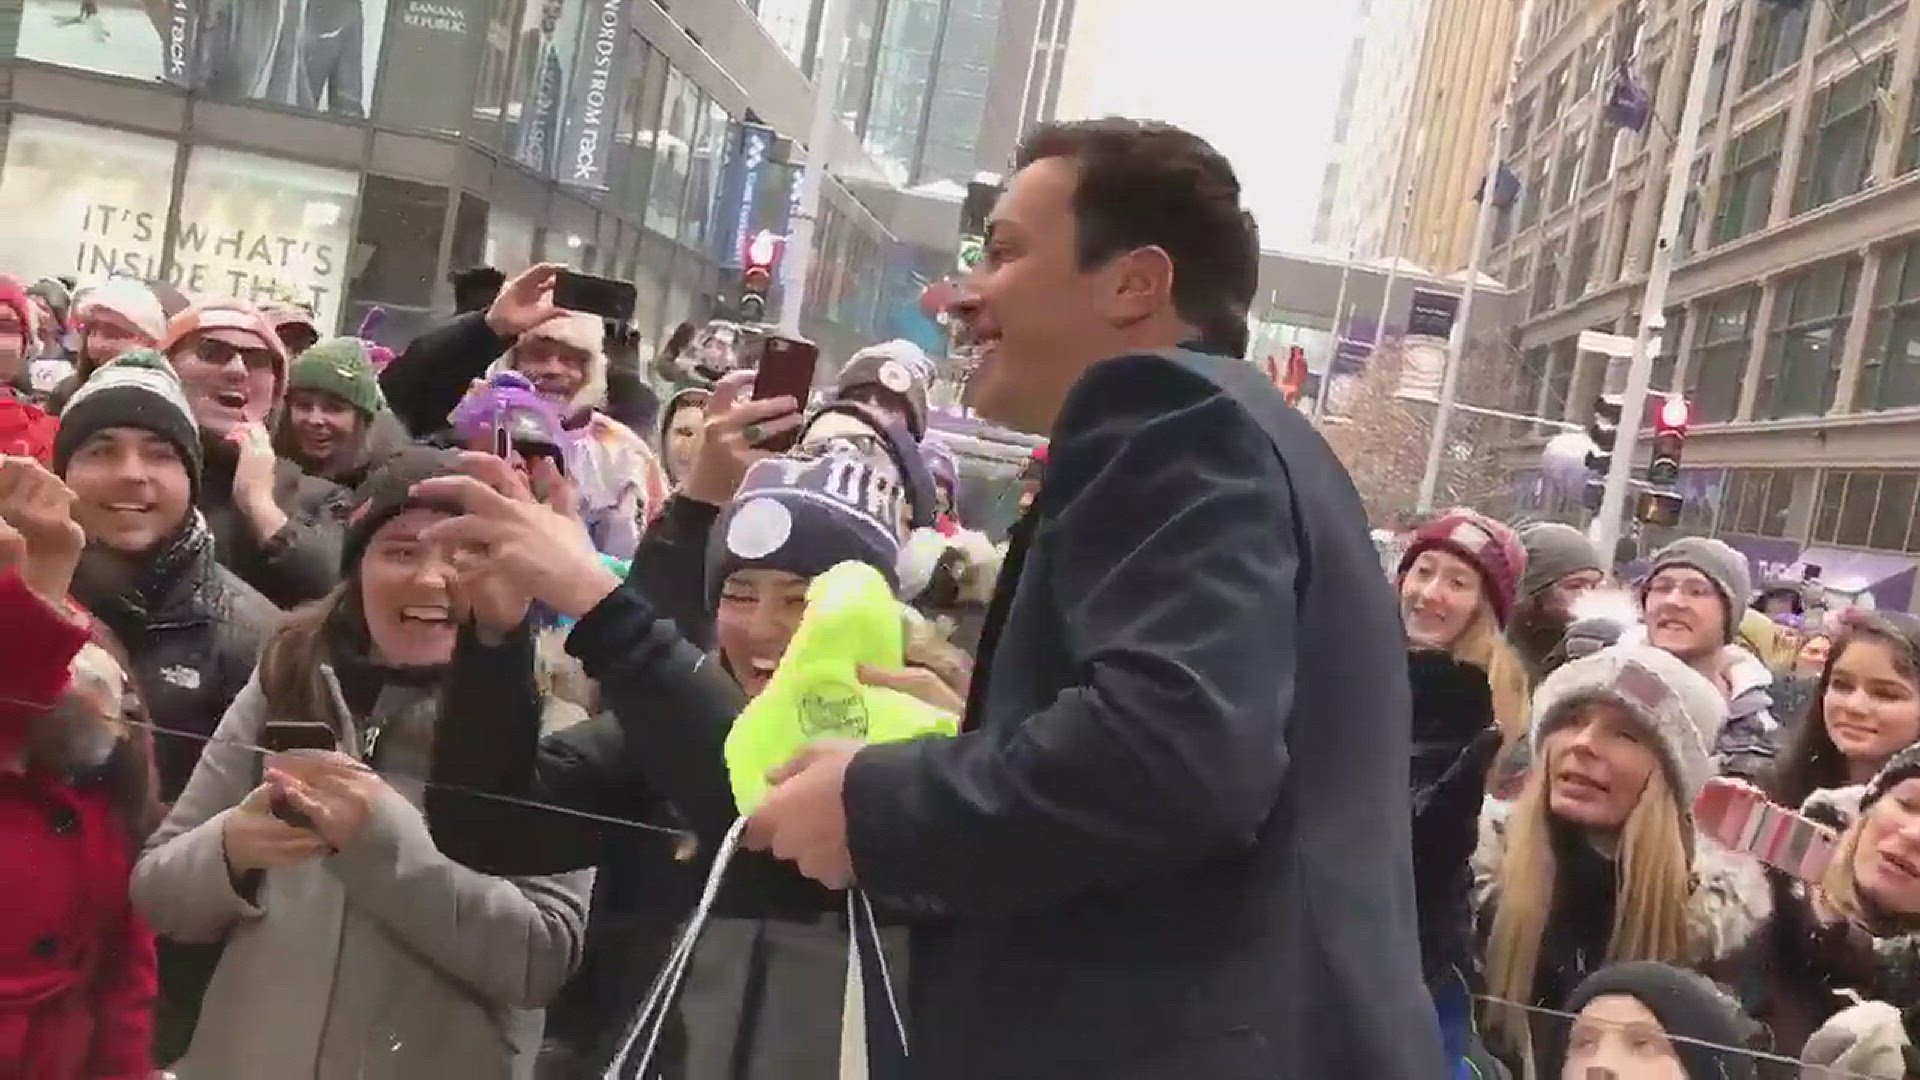 Tonight Show host Jimmy Fallon stopped by KARE 11's Warming House Saturday morning and tossed out some gifts for a few lucky fans.